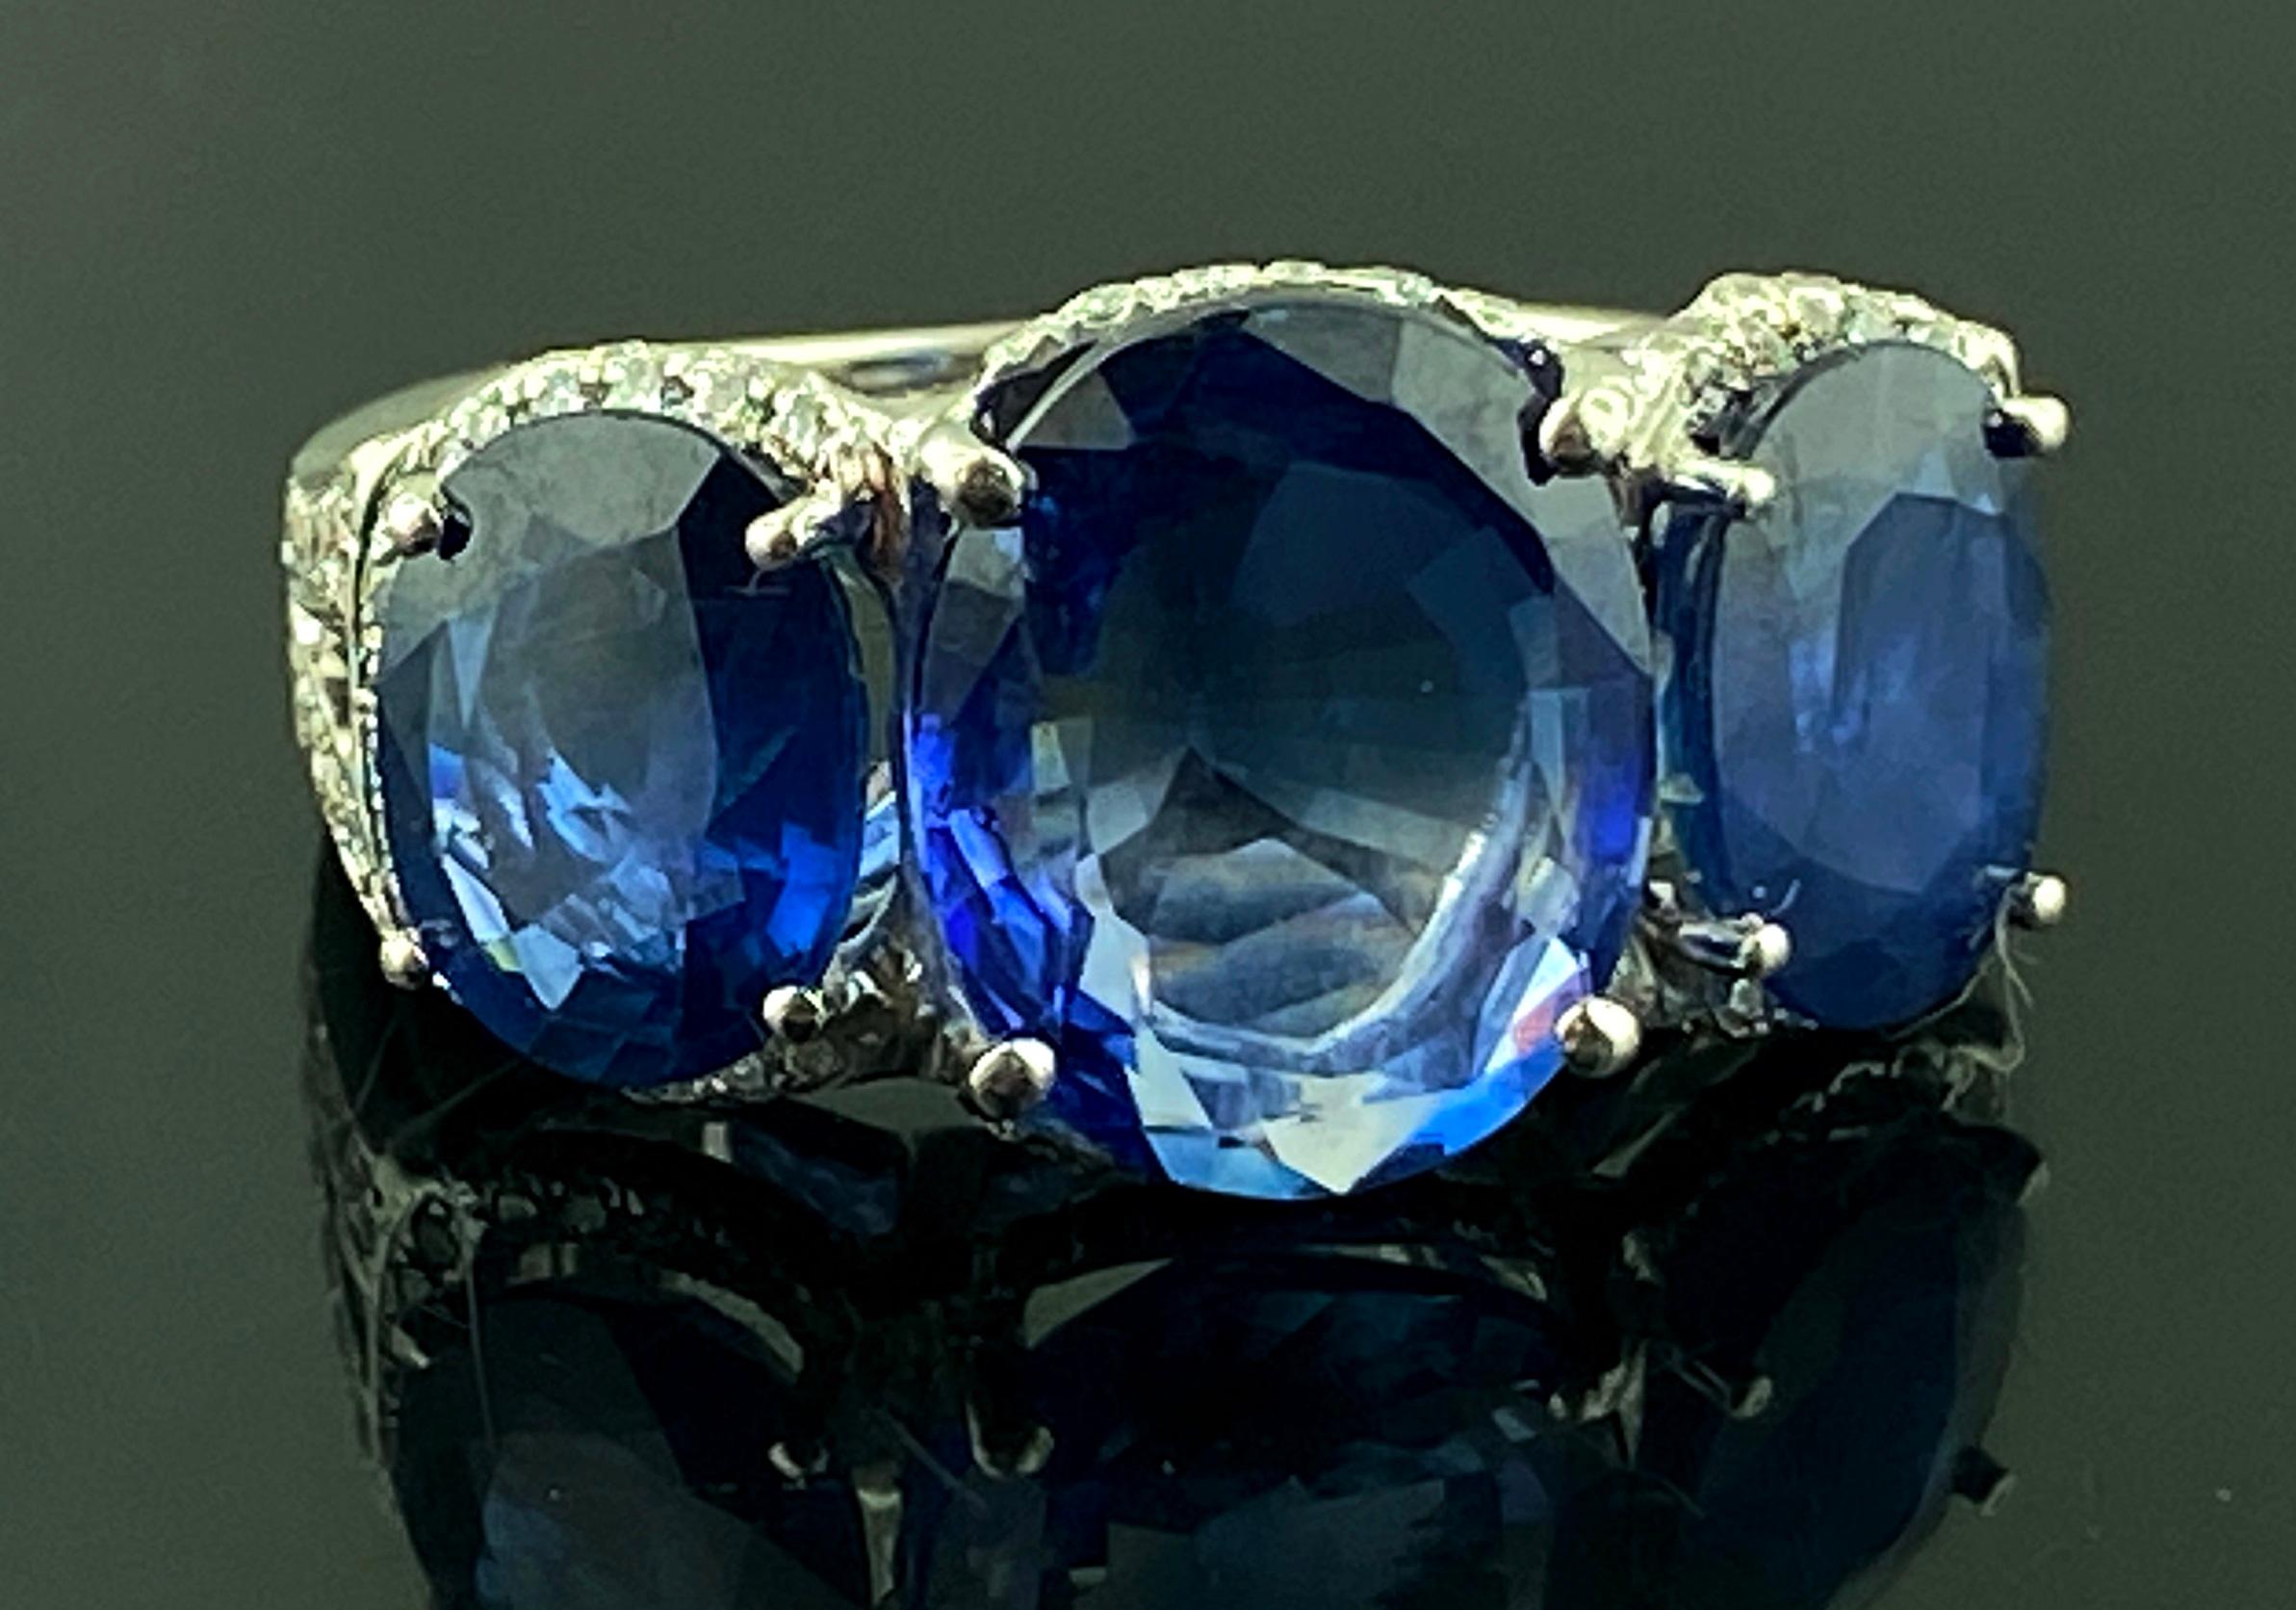 Set in Platinum, weighing 12 grams, are three Oval Cut Blue Sapphires.  The Center Sapphire is 5.48 carats with two side Sapphires weighing 2.41 carats and 2.06 carats for a total Sapphire weight of 9.95 carats.  The mounting includes 103 Round